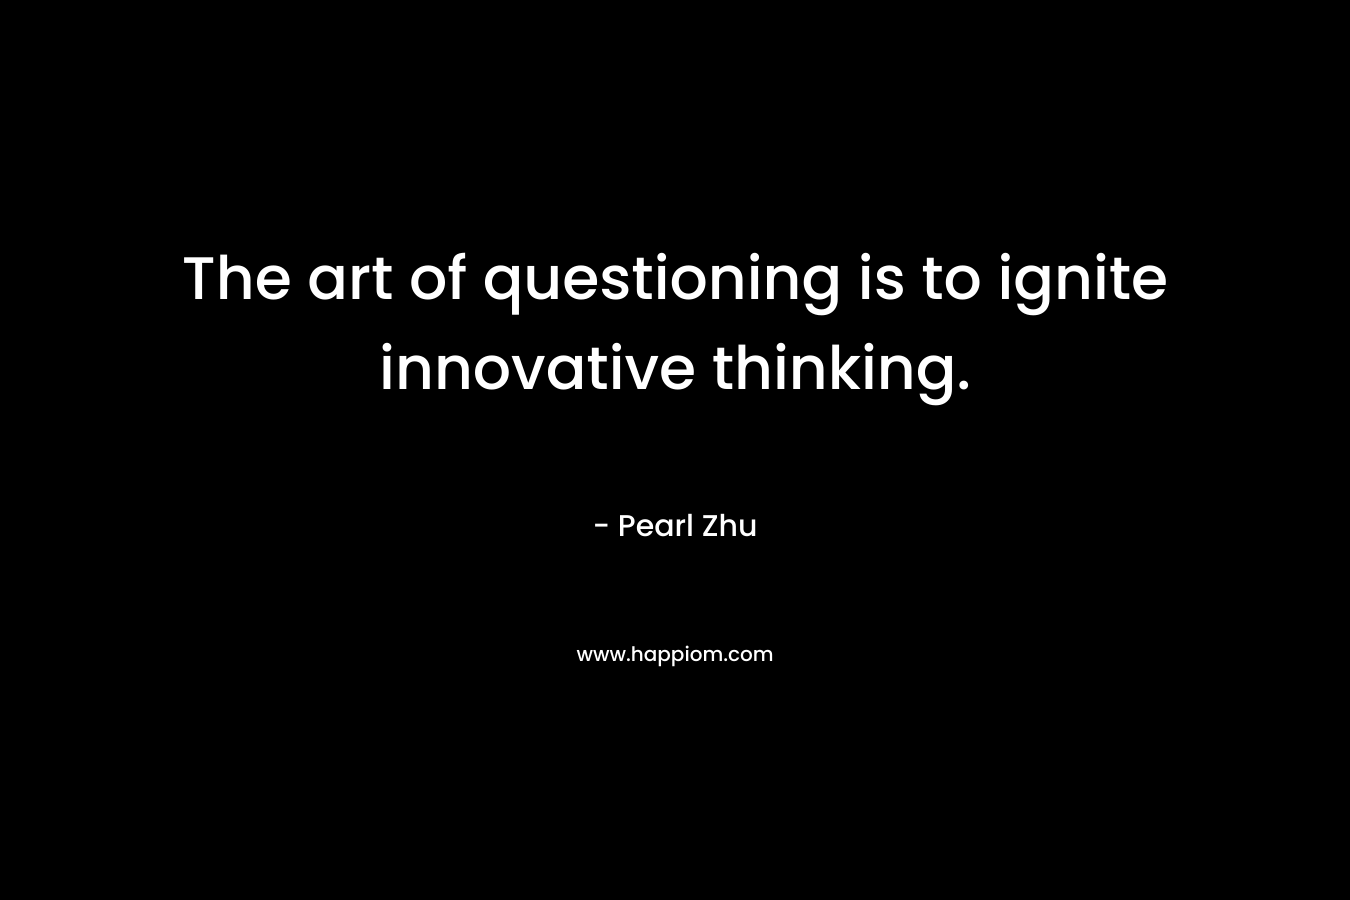 The art of questioning is to ignite innovative thinking. – Pearl Zhu